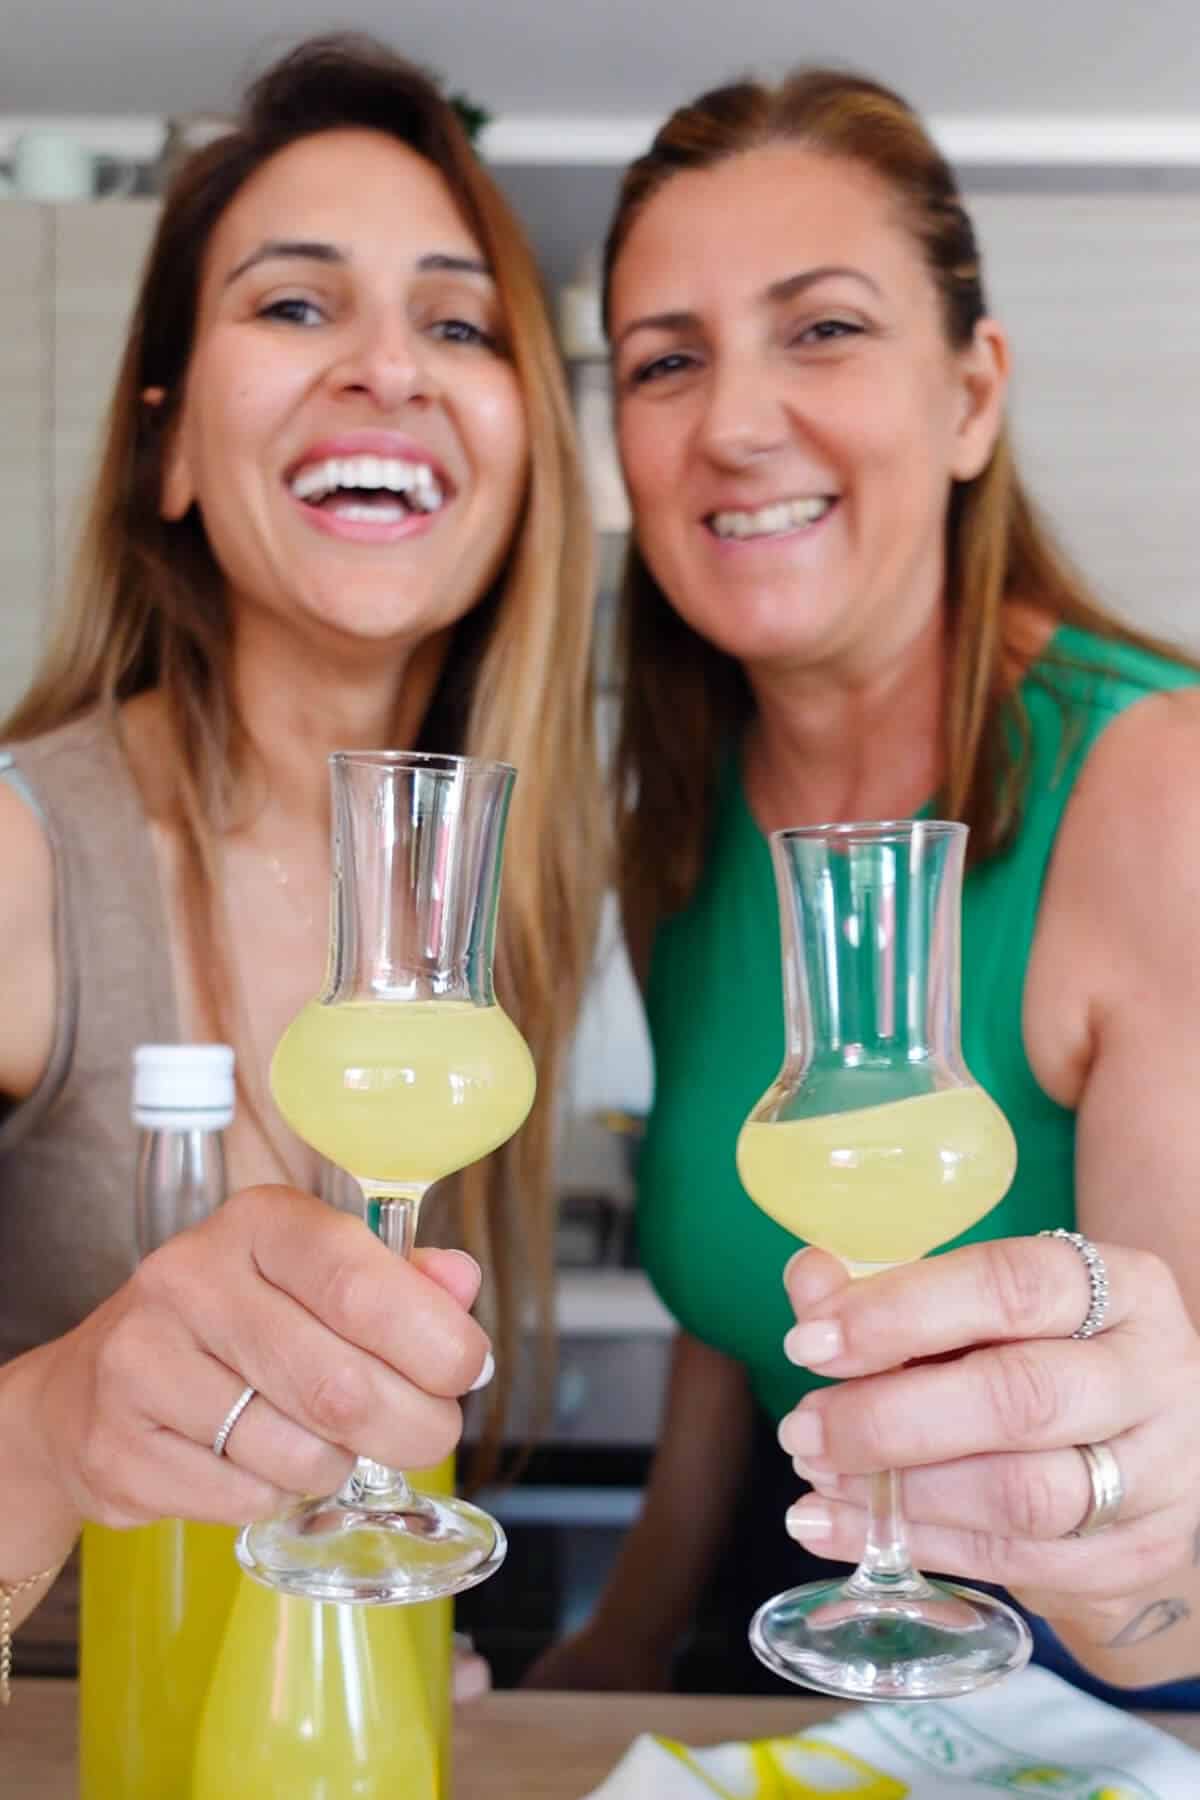 Ayeh and Ciniza holding glasses of limoncello